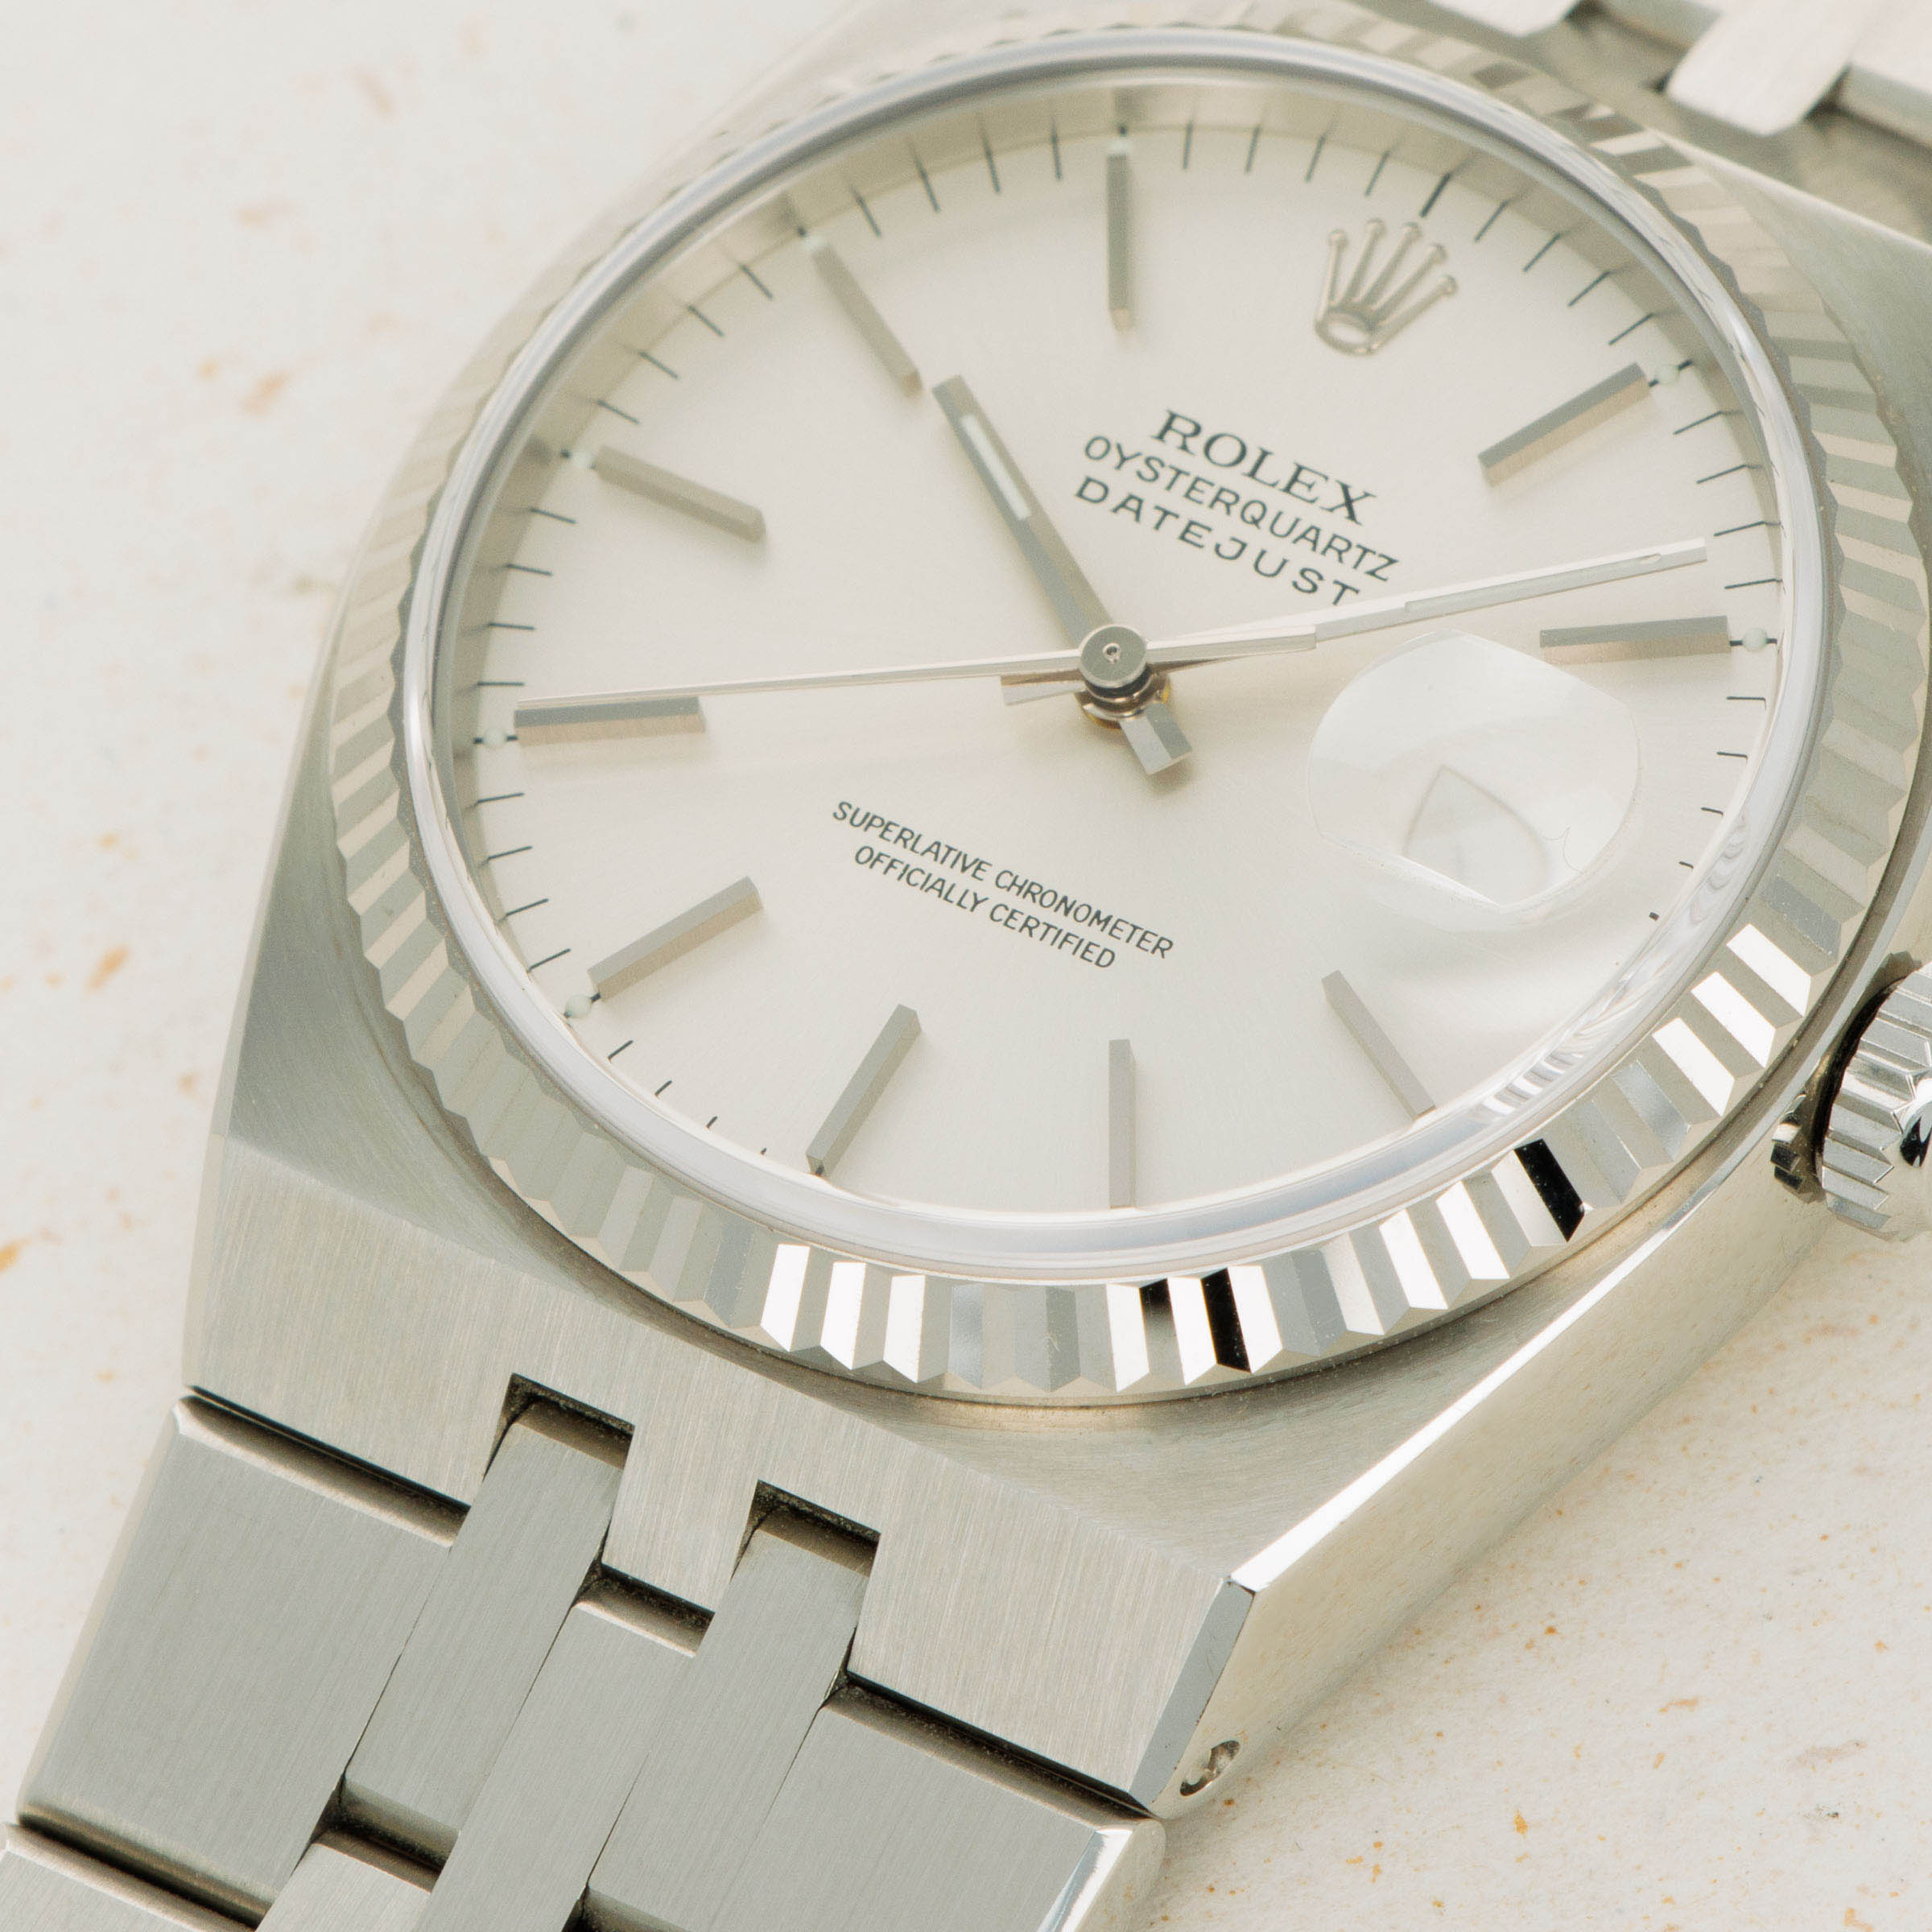 Rolex Datejust Oysterquartz 17014 Silver Dial New Old Stock Box 